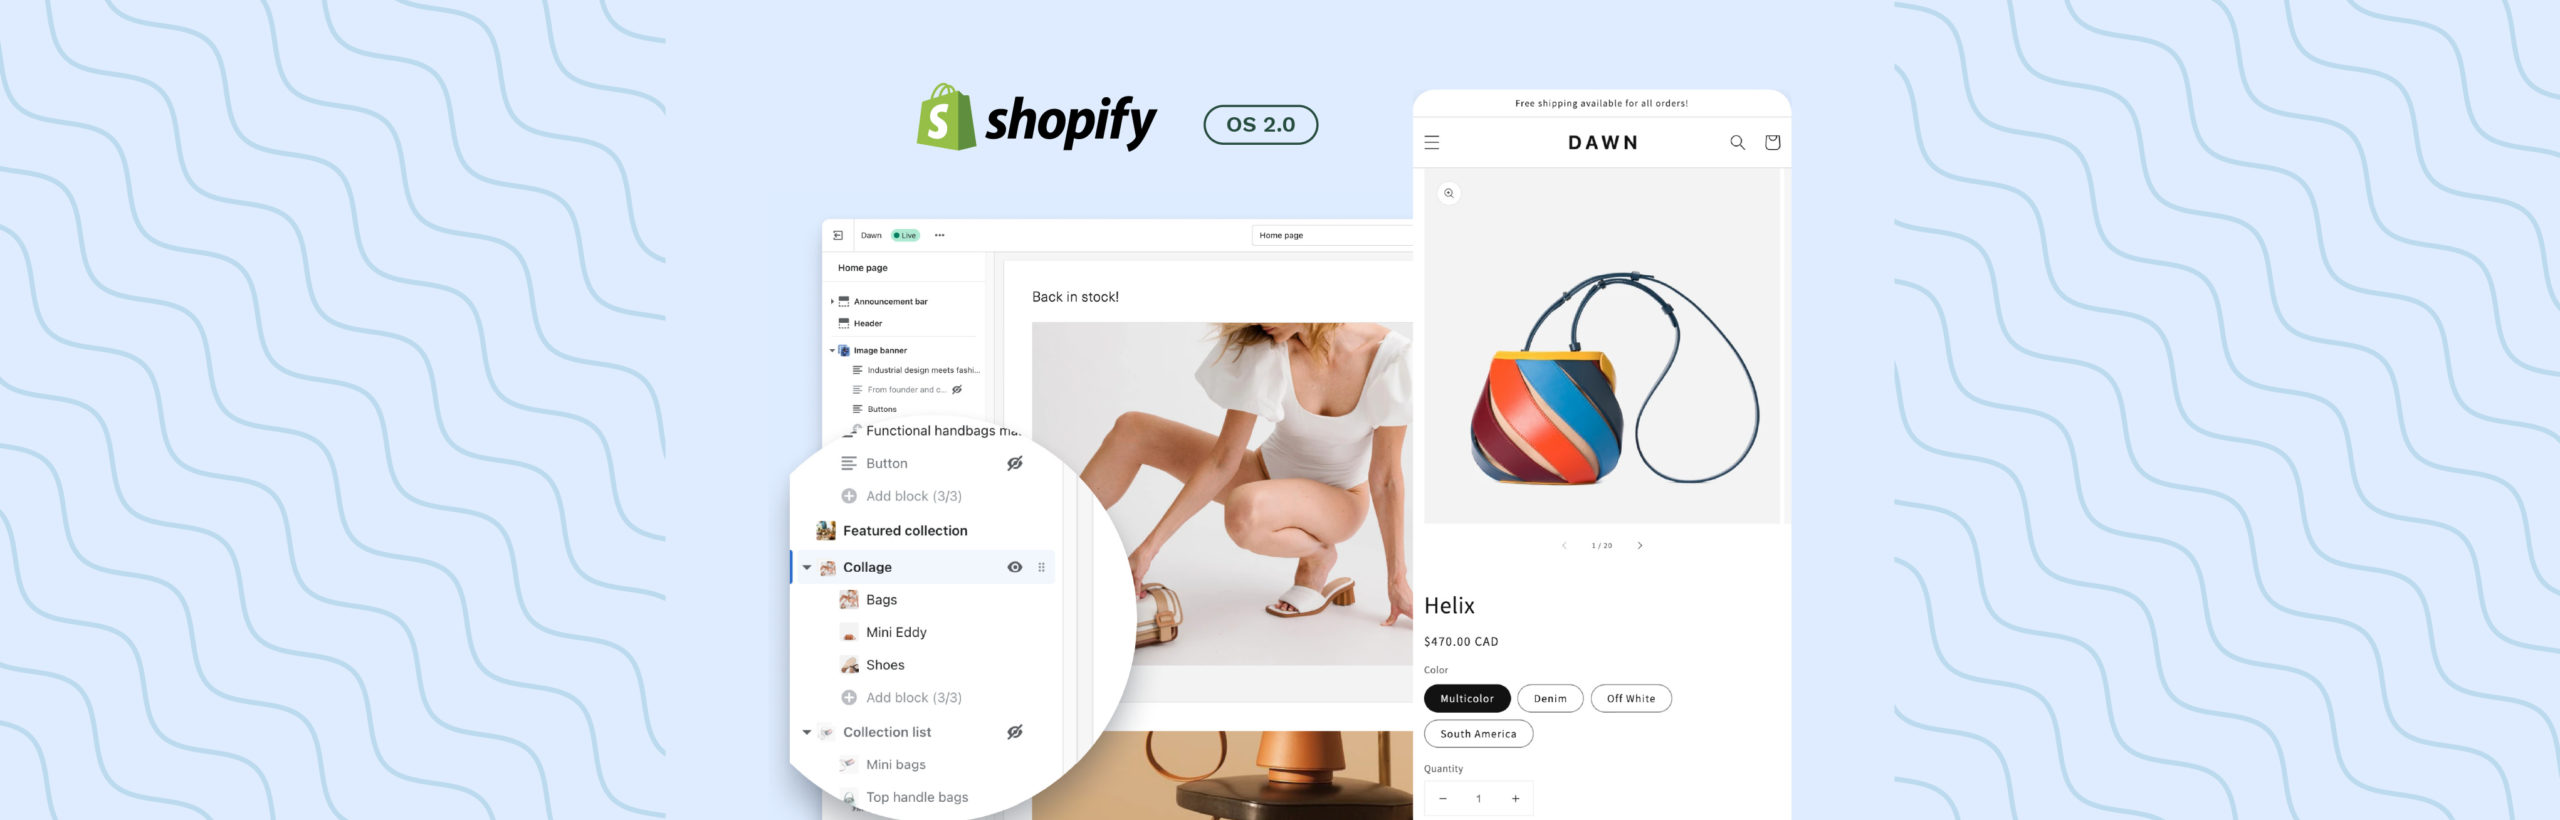 What Is Shopify Online Store 2.0 For Merchants?